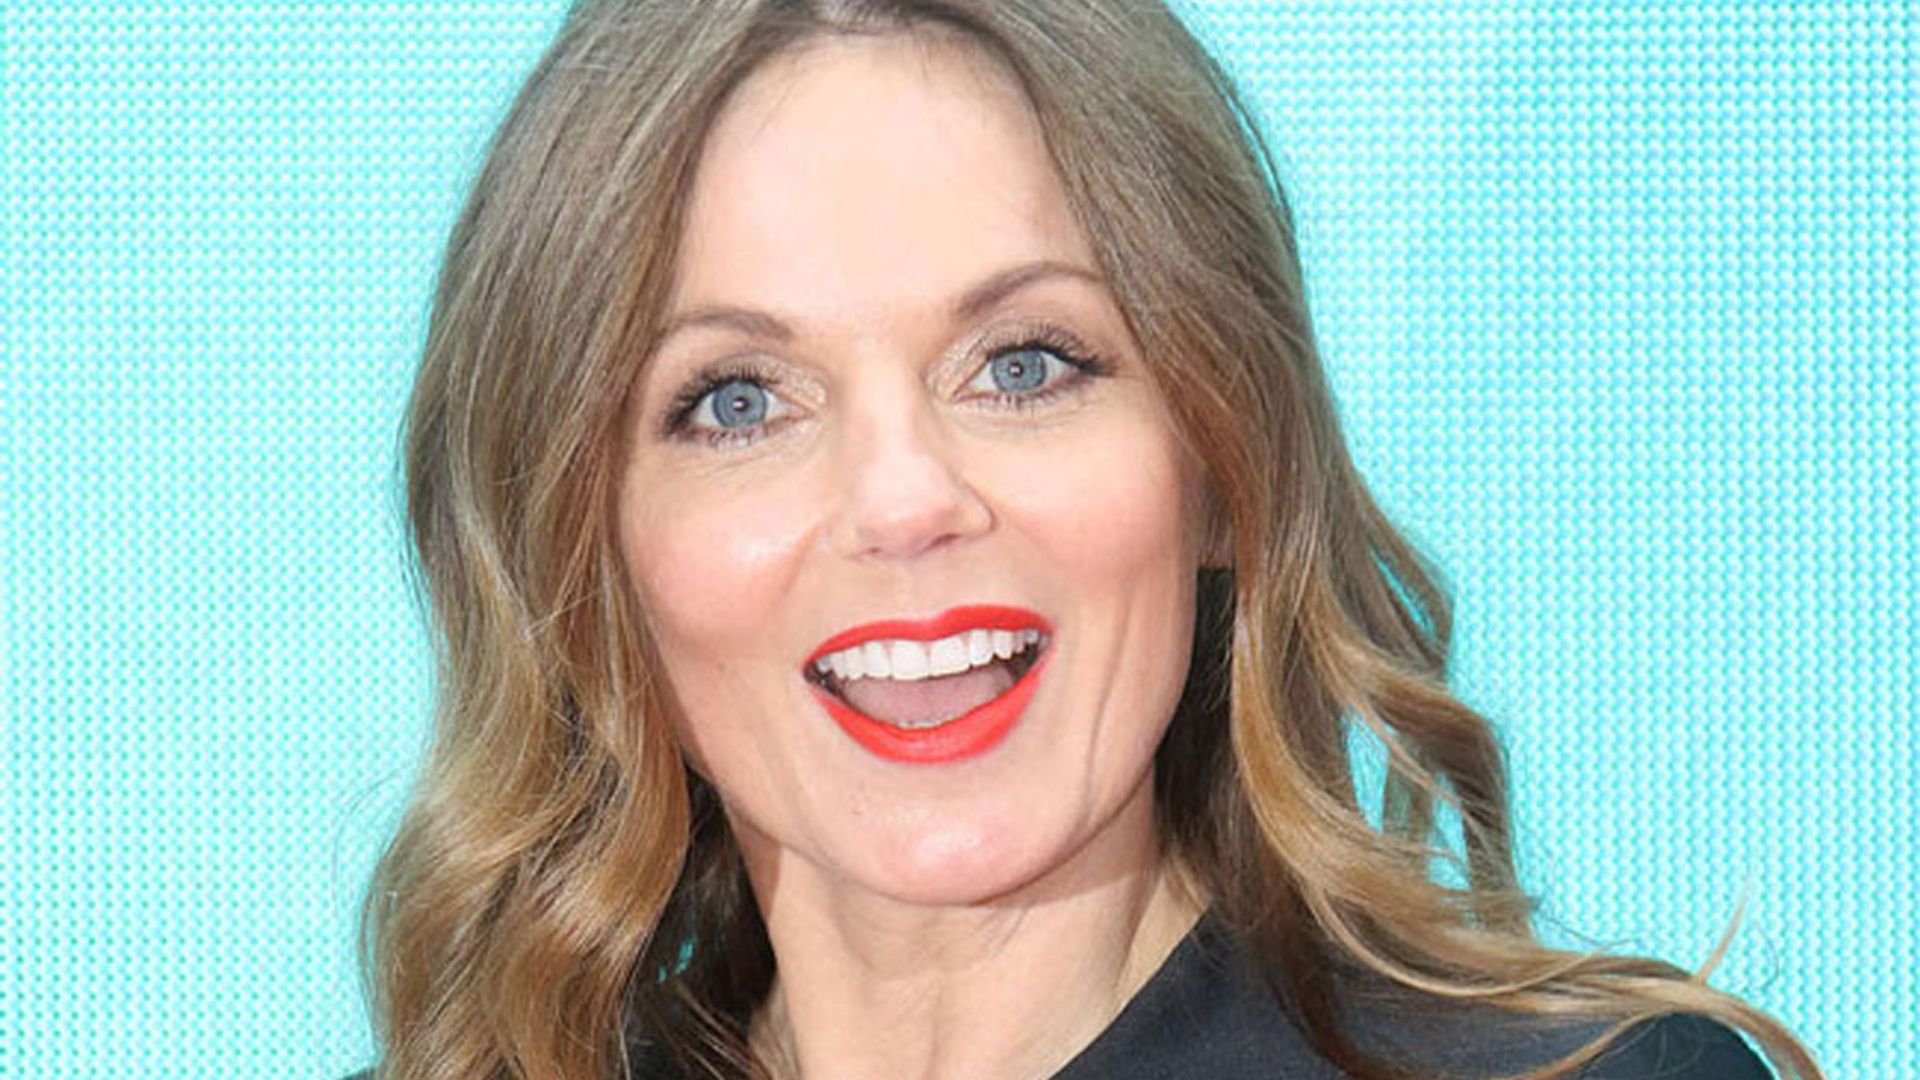 Geri Horner stuns fans in skinny jeans and must-see accessory